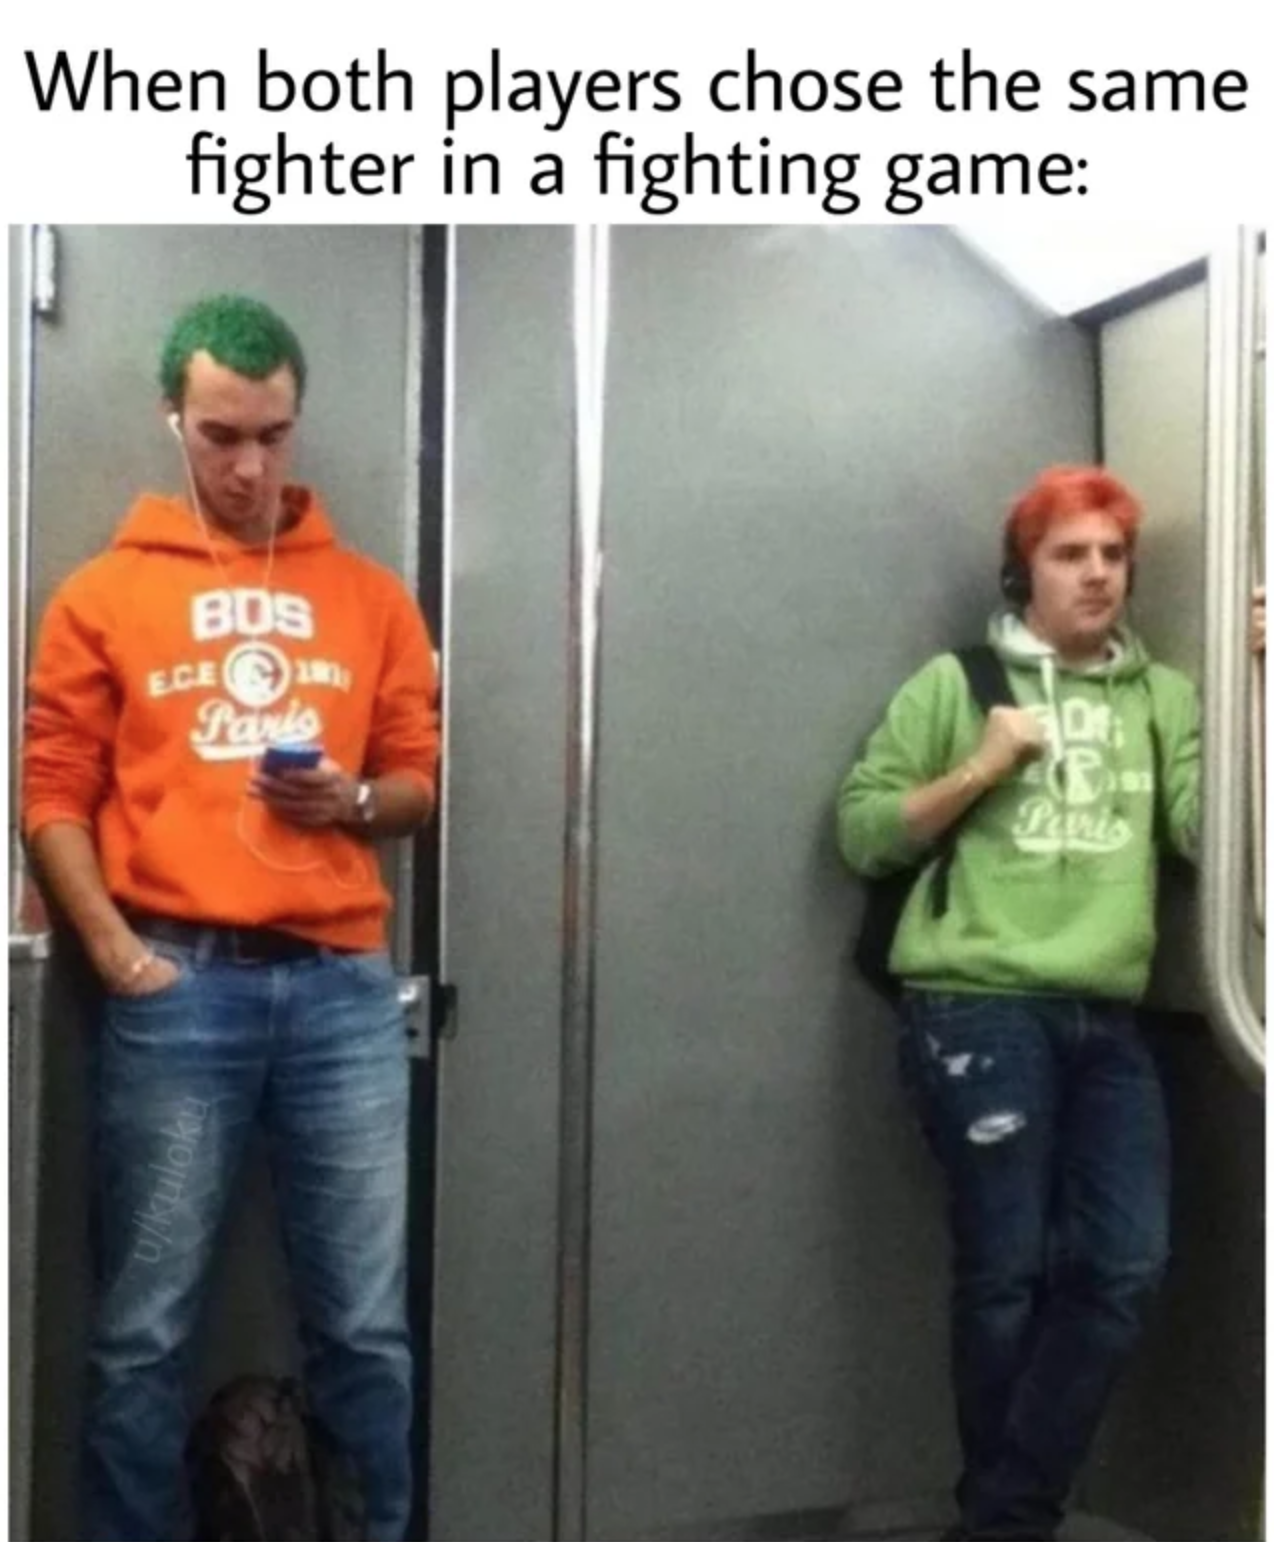 funny gaming memes - t shirt - When both players chose the same fighter in a fighting game Bds Fans Le